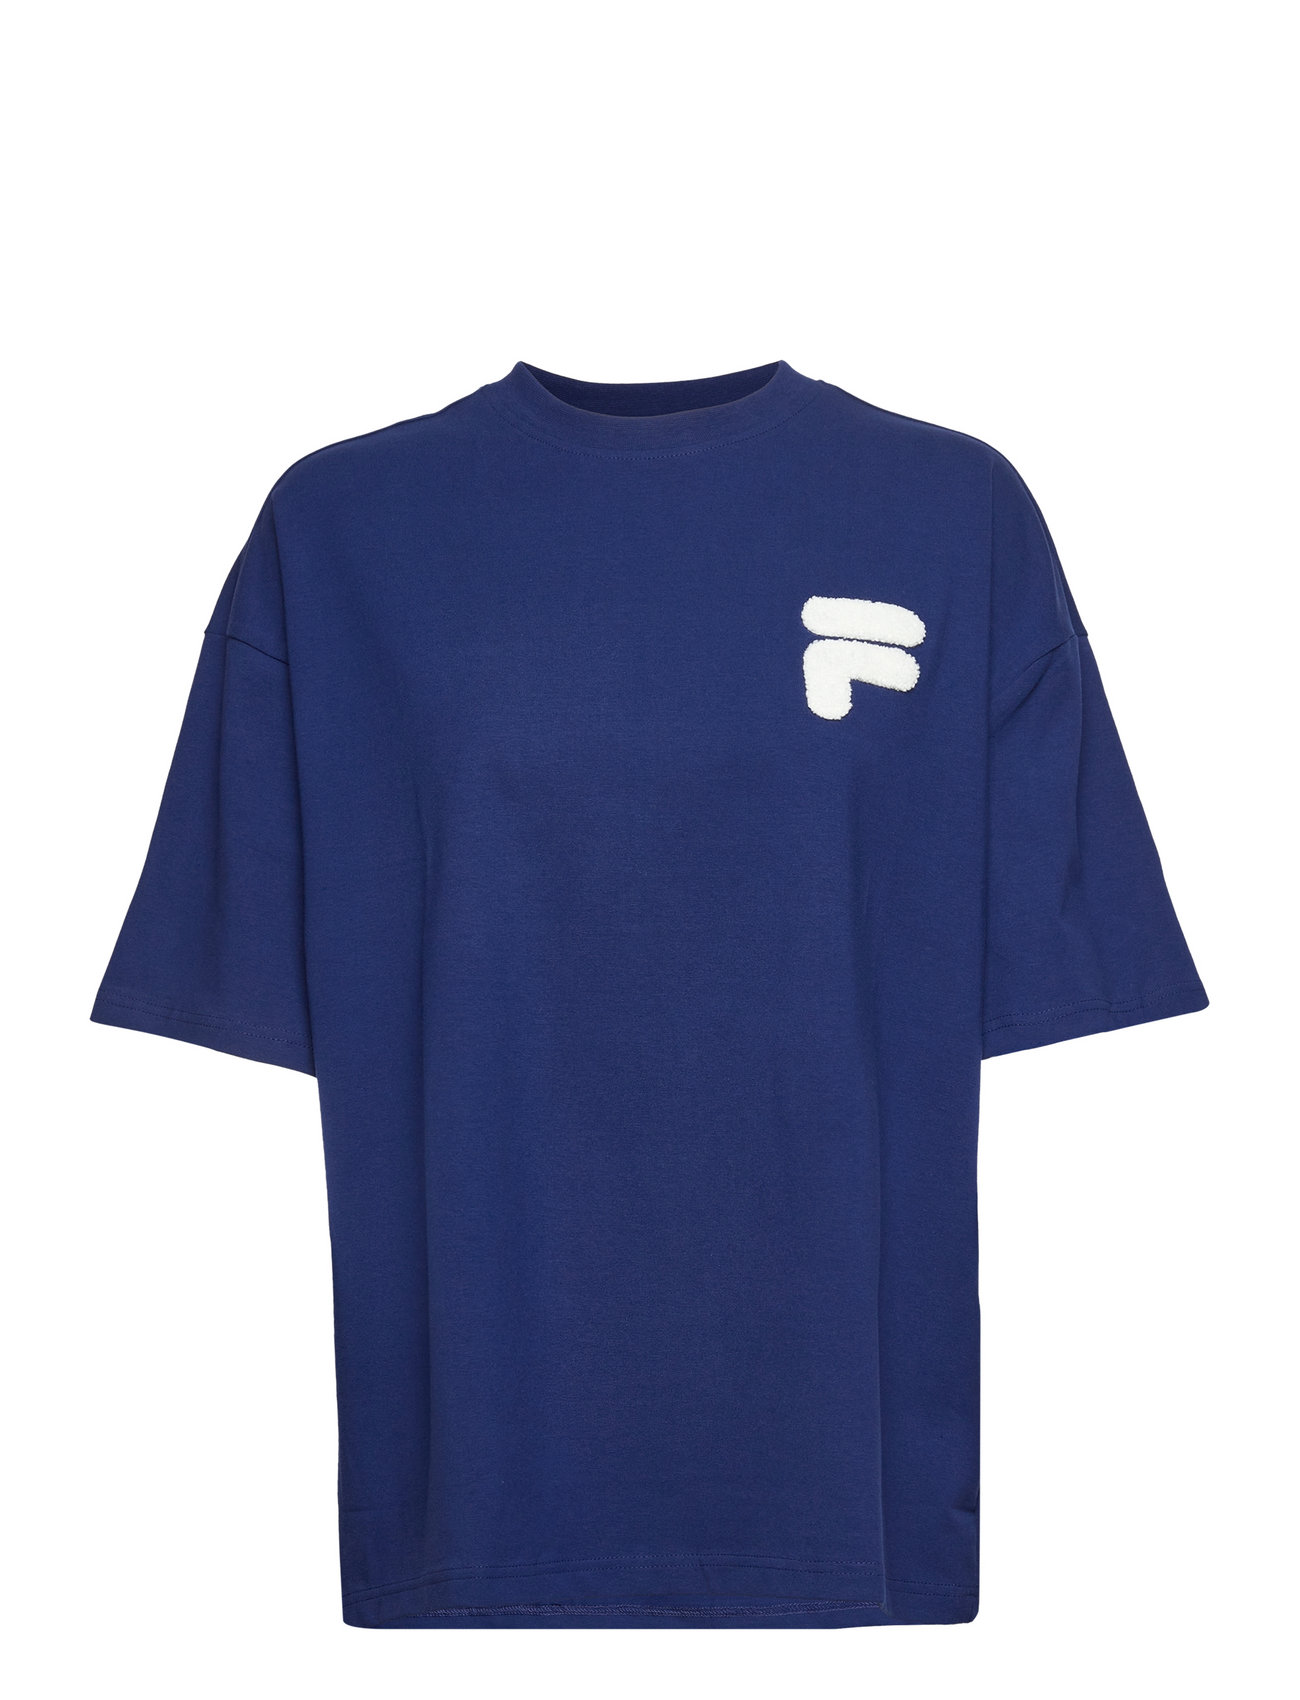 Cottens Dropped Shoulder Tee - T-shirts | Boozt.com